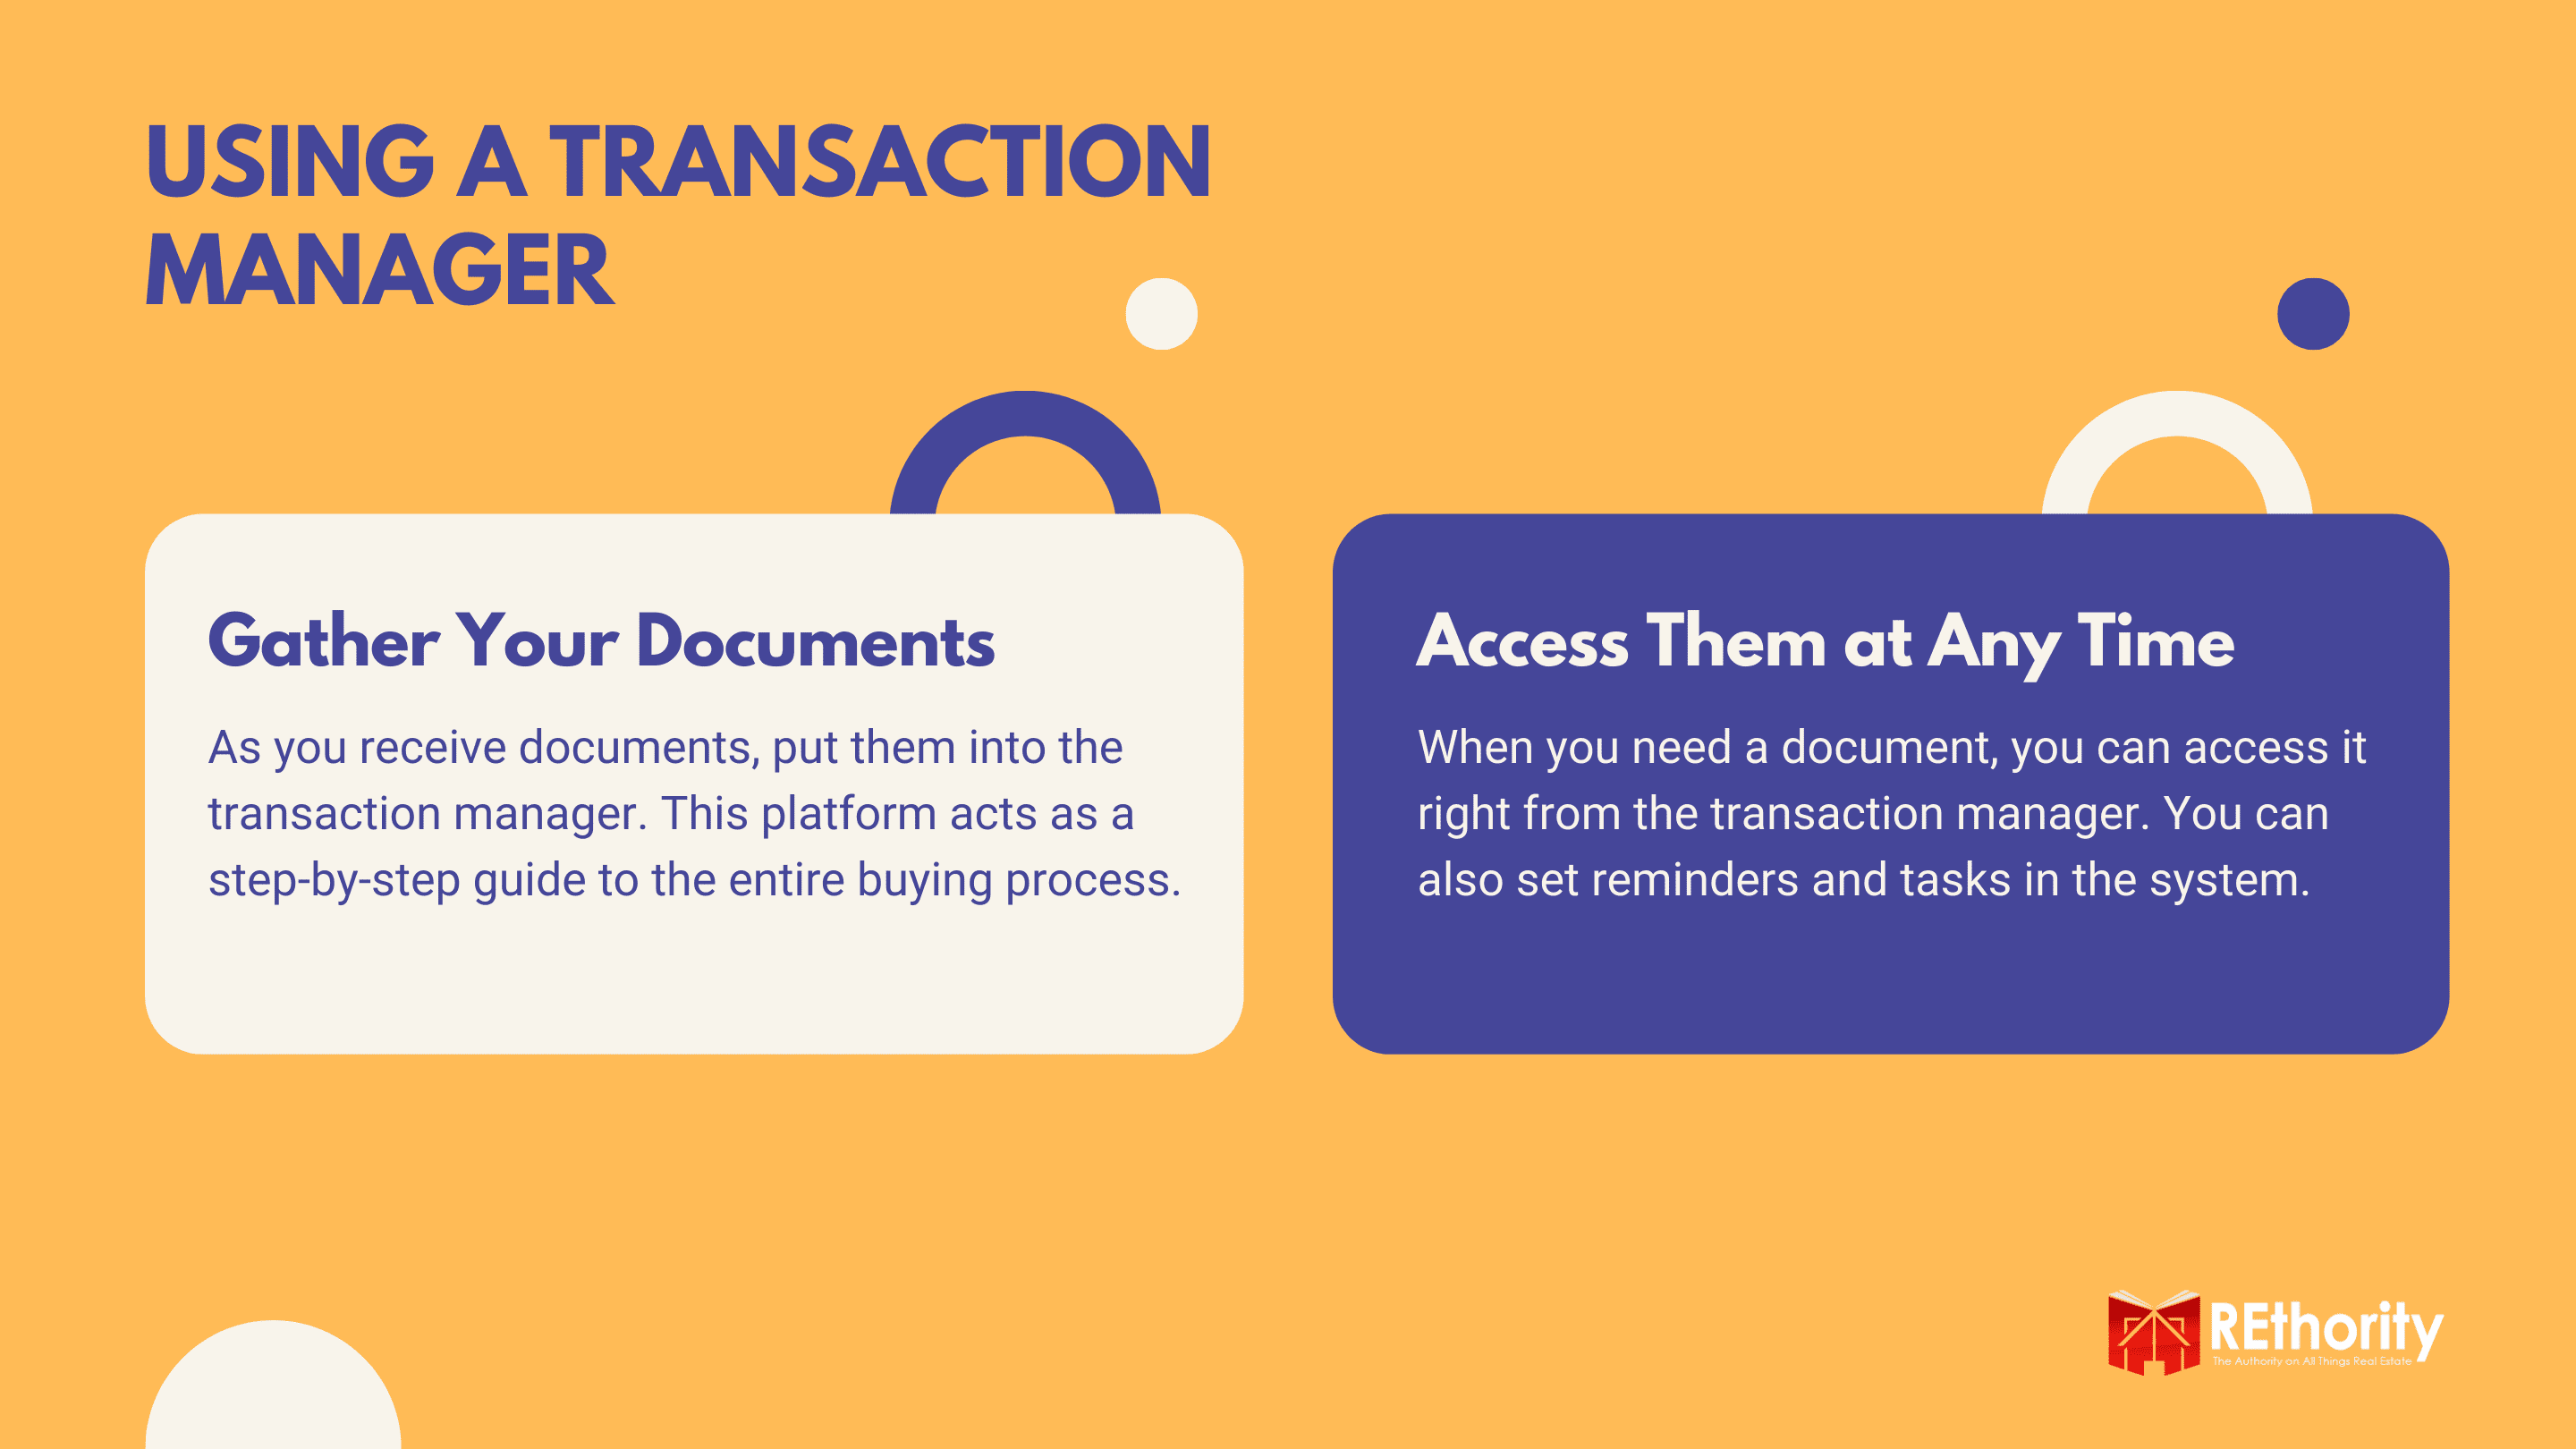 Using a real estate transaction manager graphic against an orange background